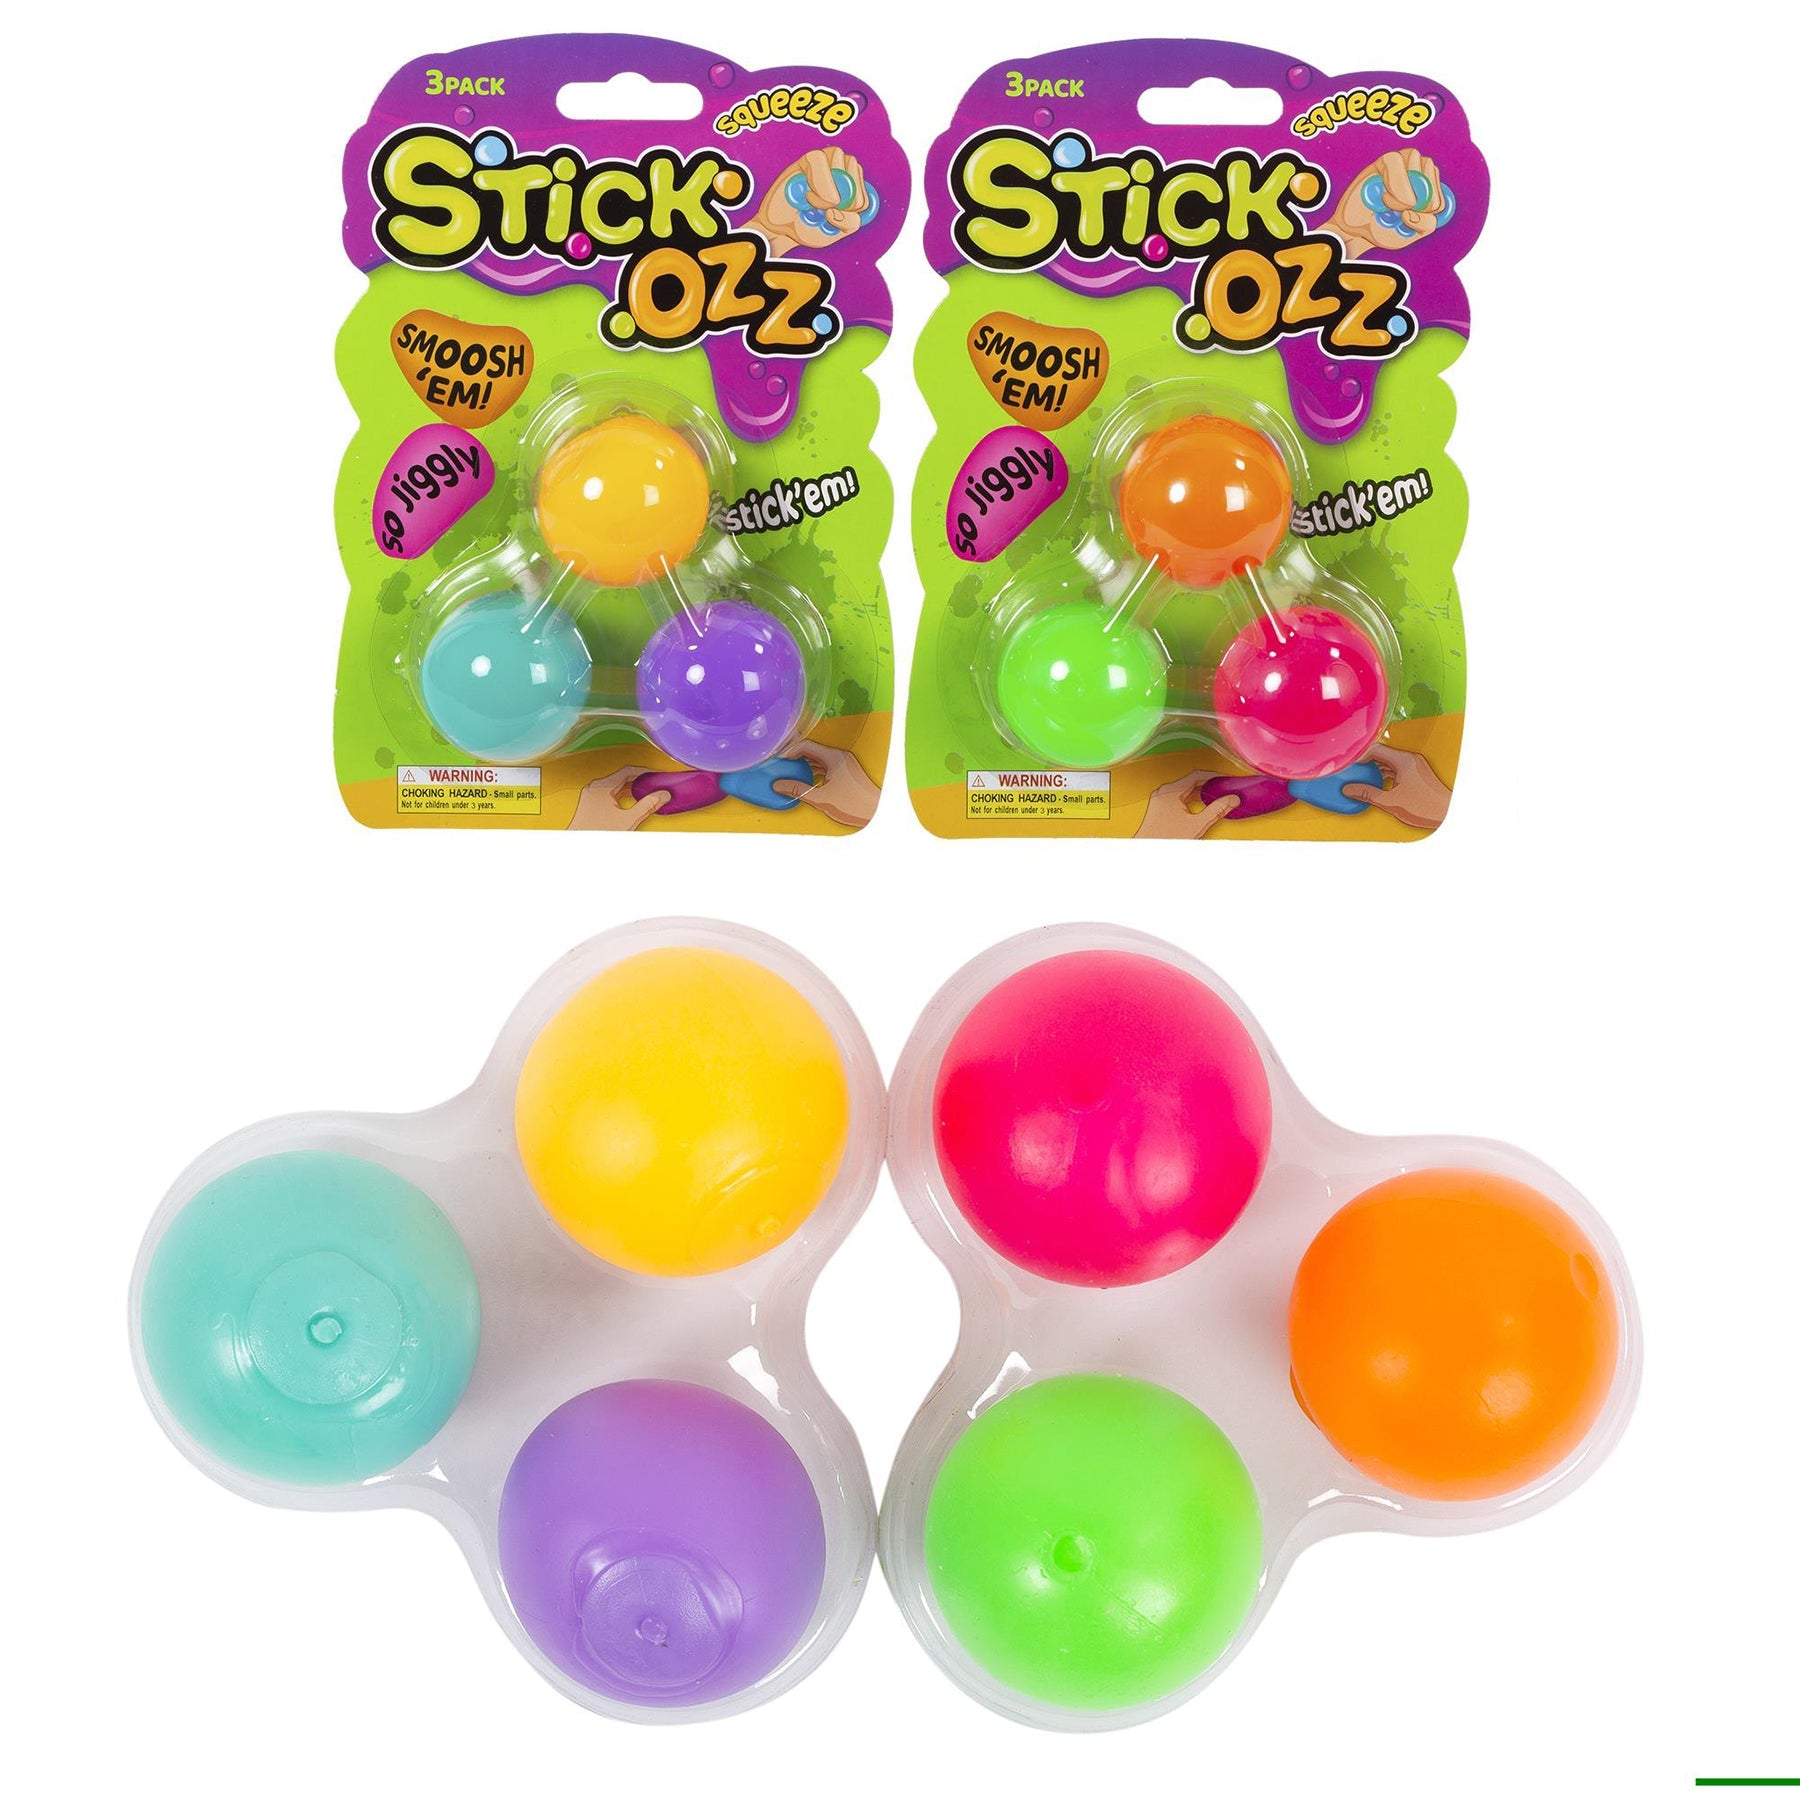 Stick-Ozz 3 Squeeze Balls 1.5in